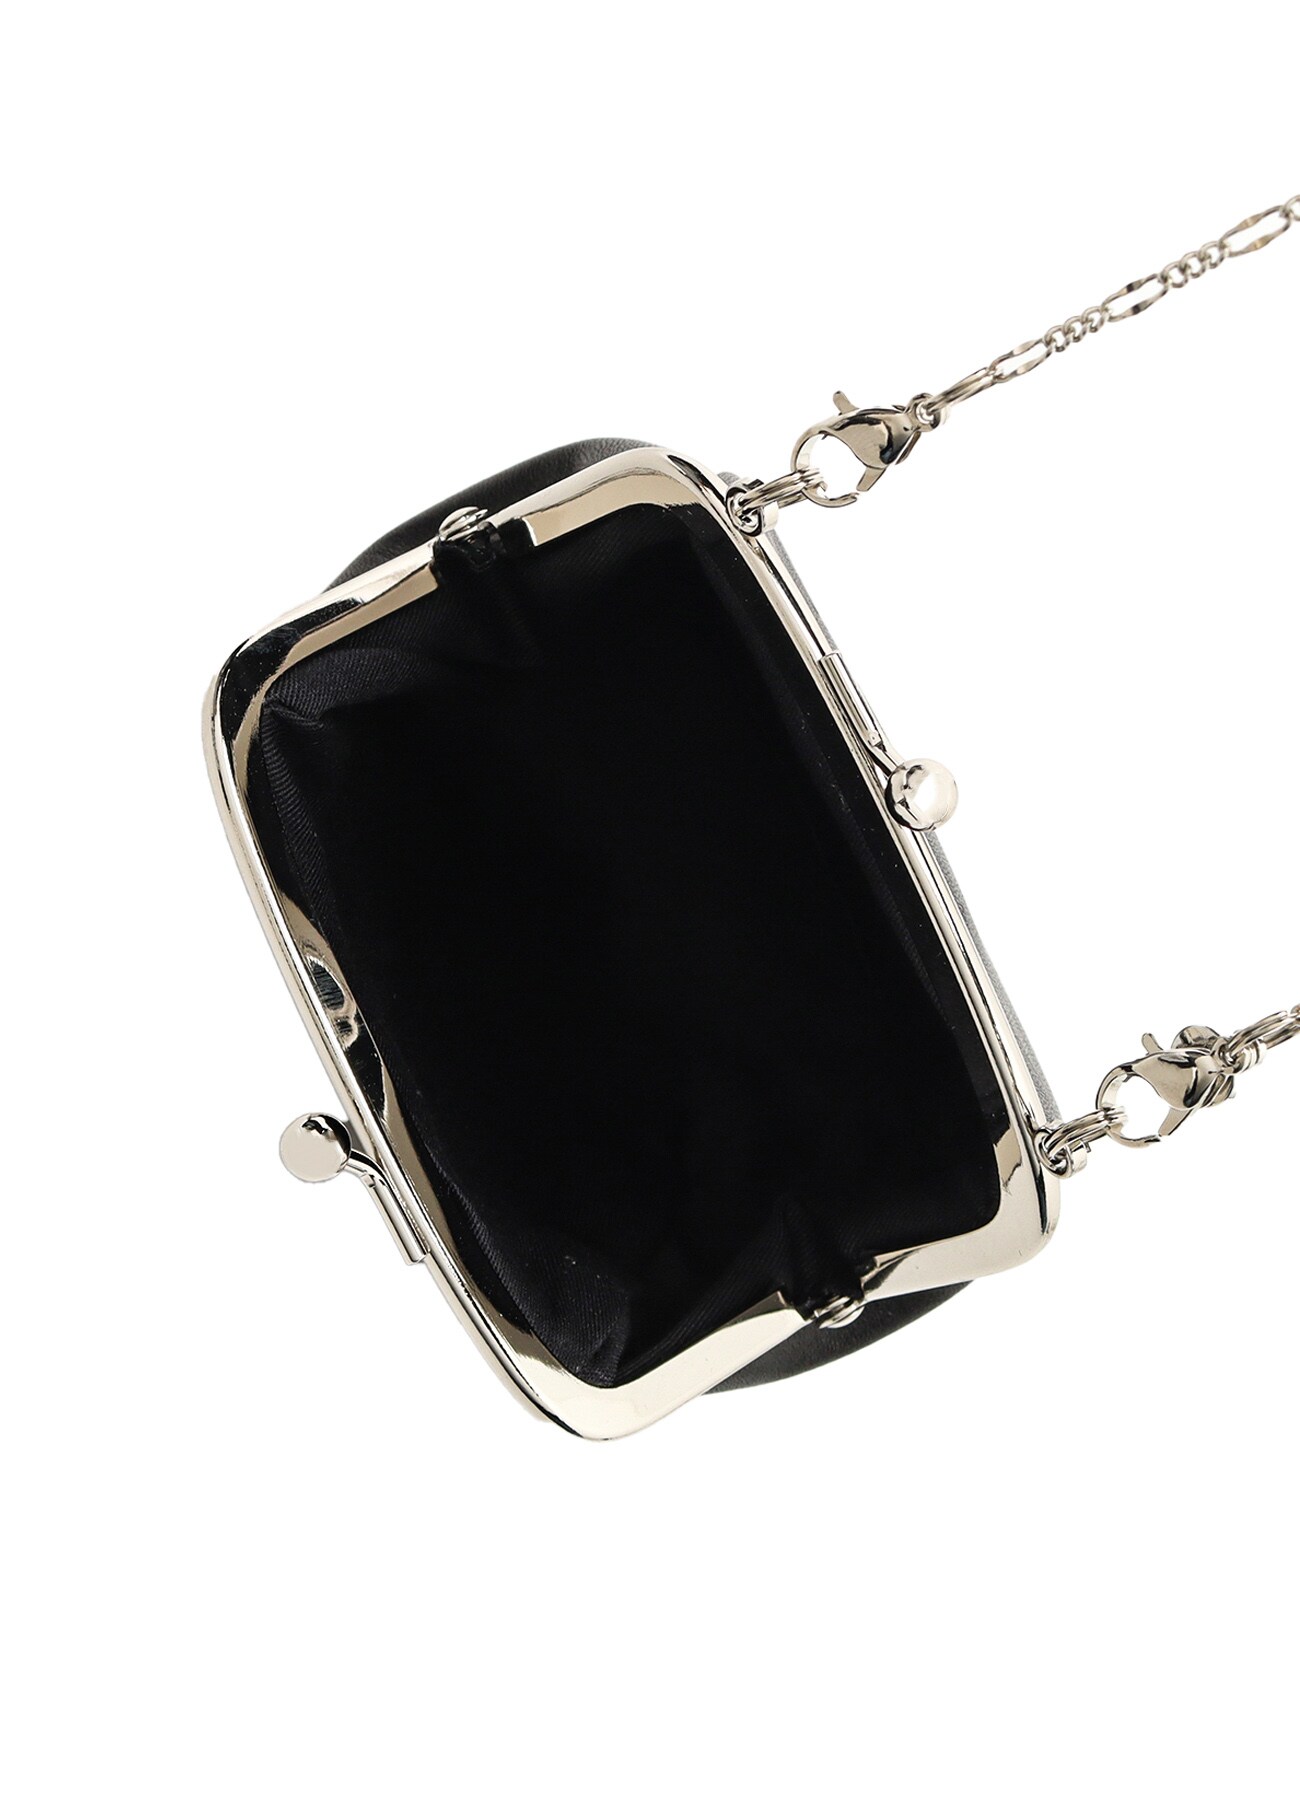 【7/26 12:00(JTS) Release】SEMI-GLOSS SMOOTH LEATHER CLASP NECKLACE M